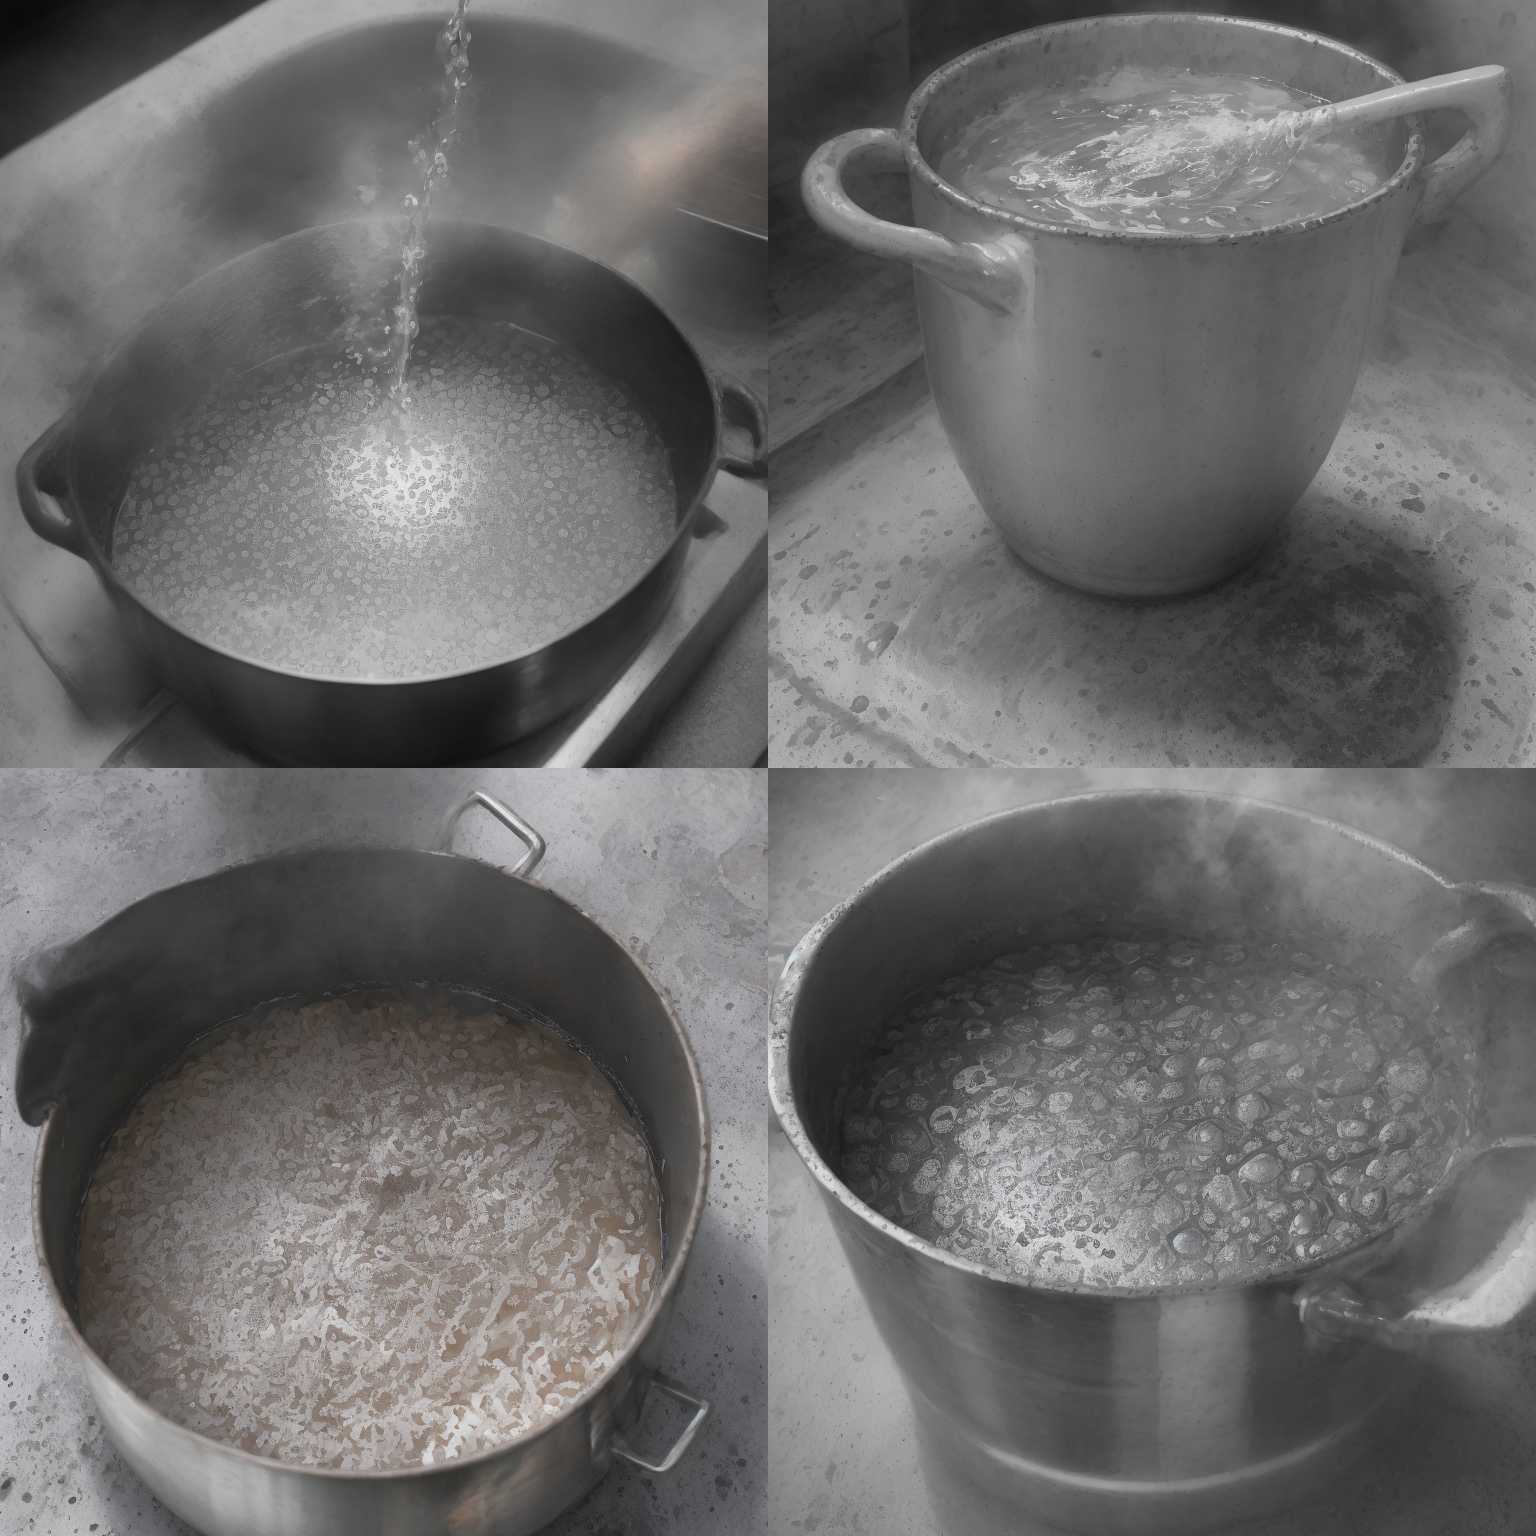 A pot of water heated to 100 degrees celsius